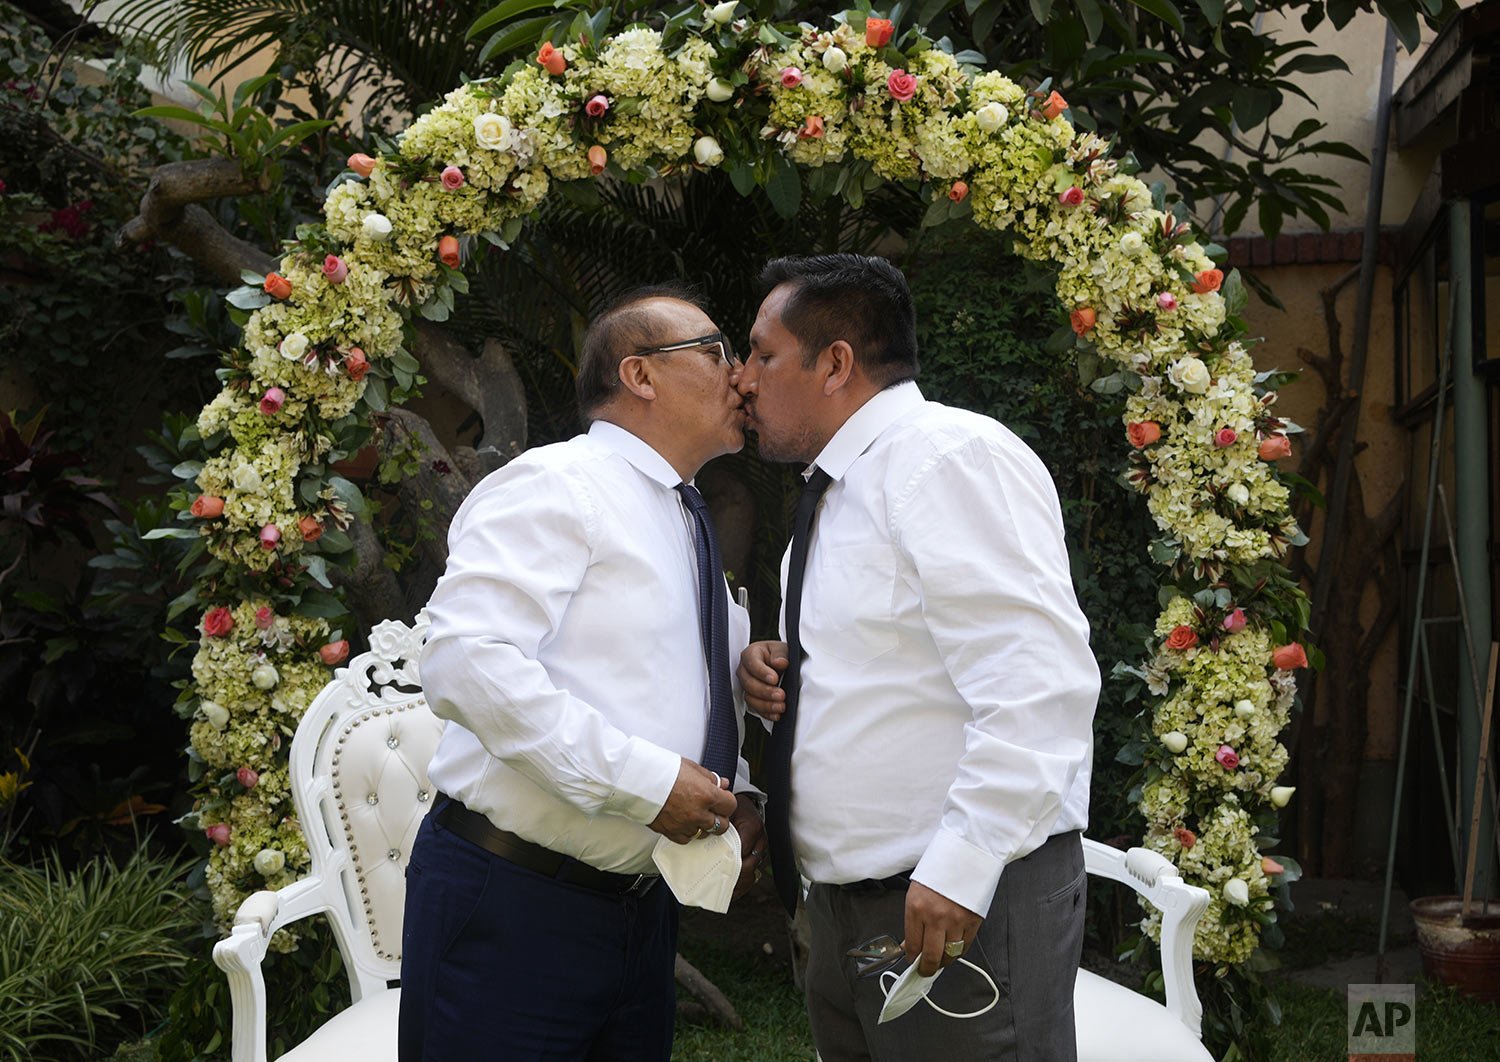  Juan Alfonso, left, kisses his partner Miguel Angel during a symbolic gay wedding ceremony, organized by Peru's LGBT community to promote same-sex marriage, ahead of the feast of Saint Valentine in Lima, Feb. 12, 2022. Same-sex marriage is not legal